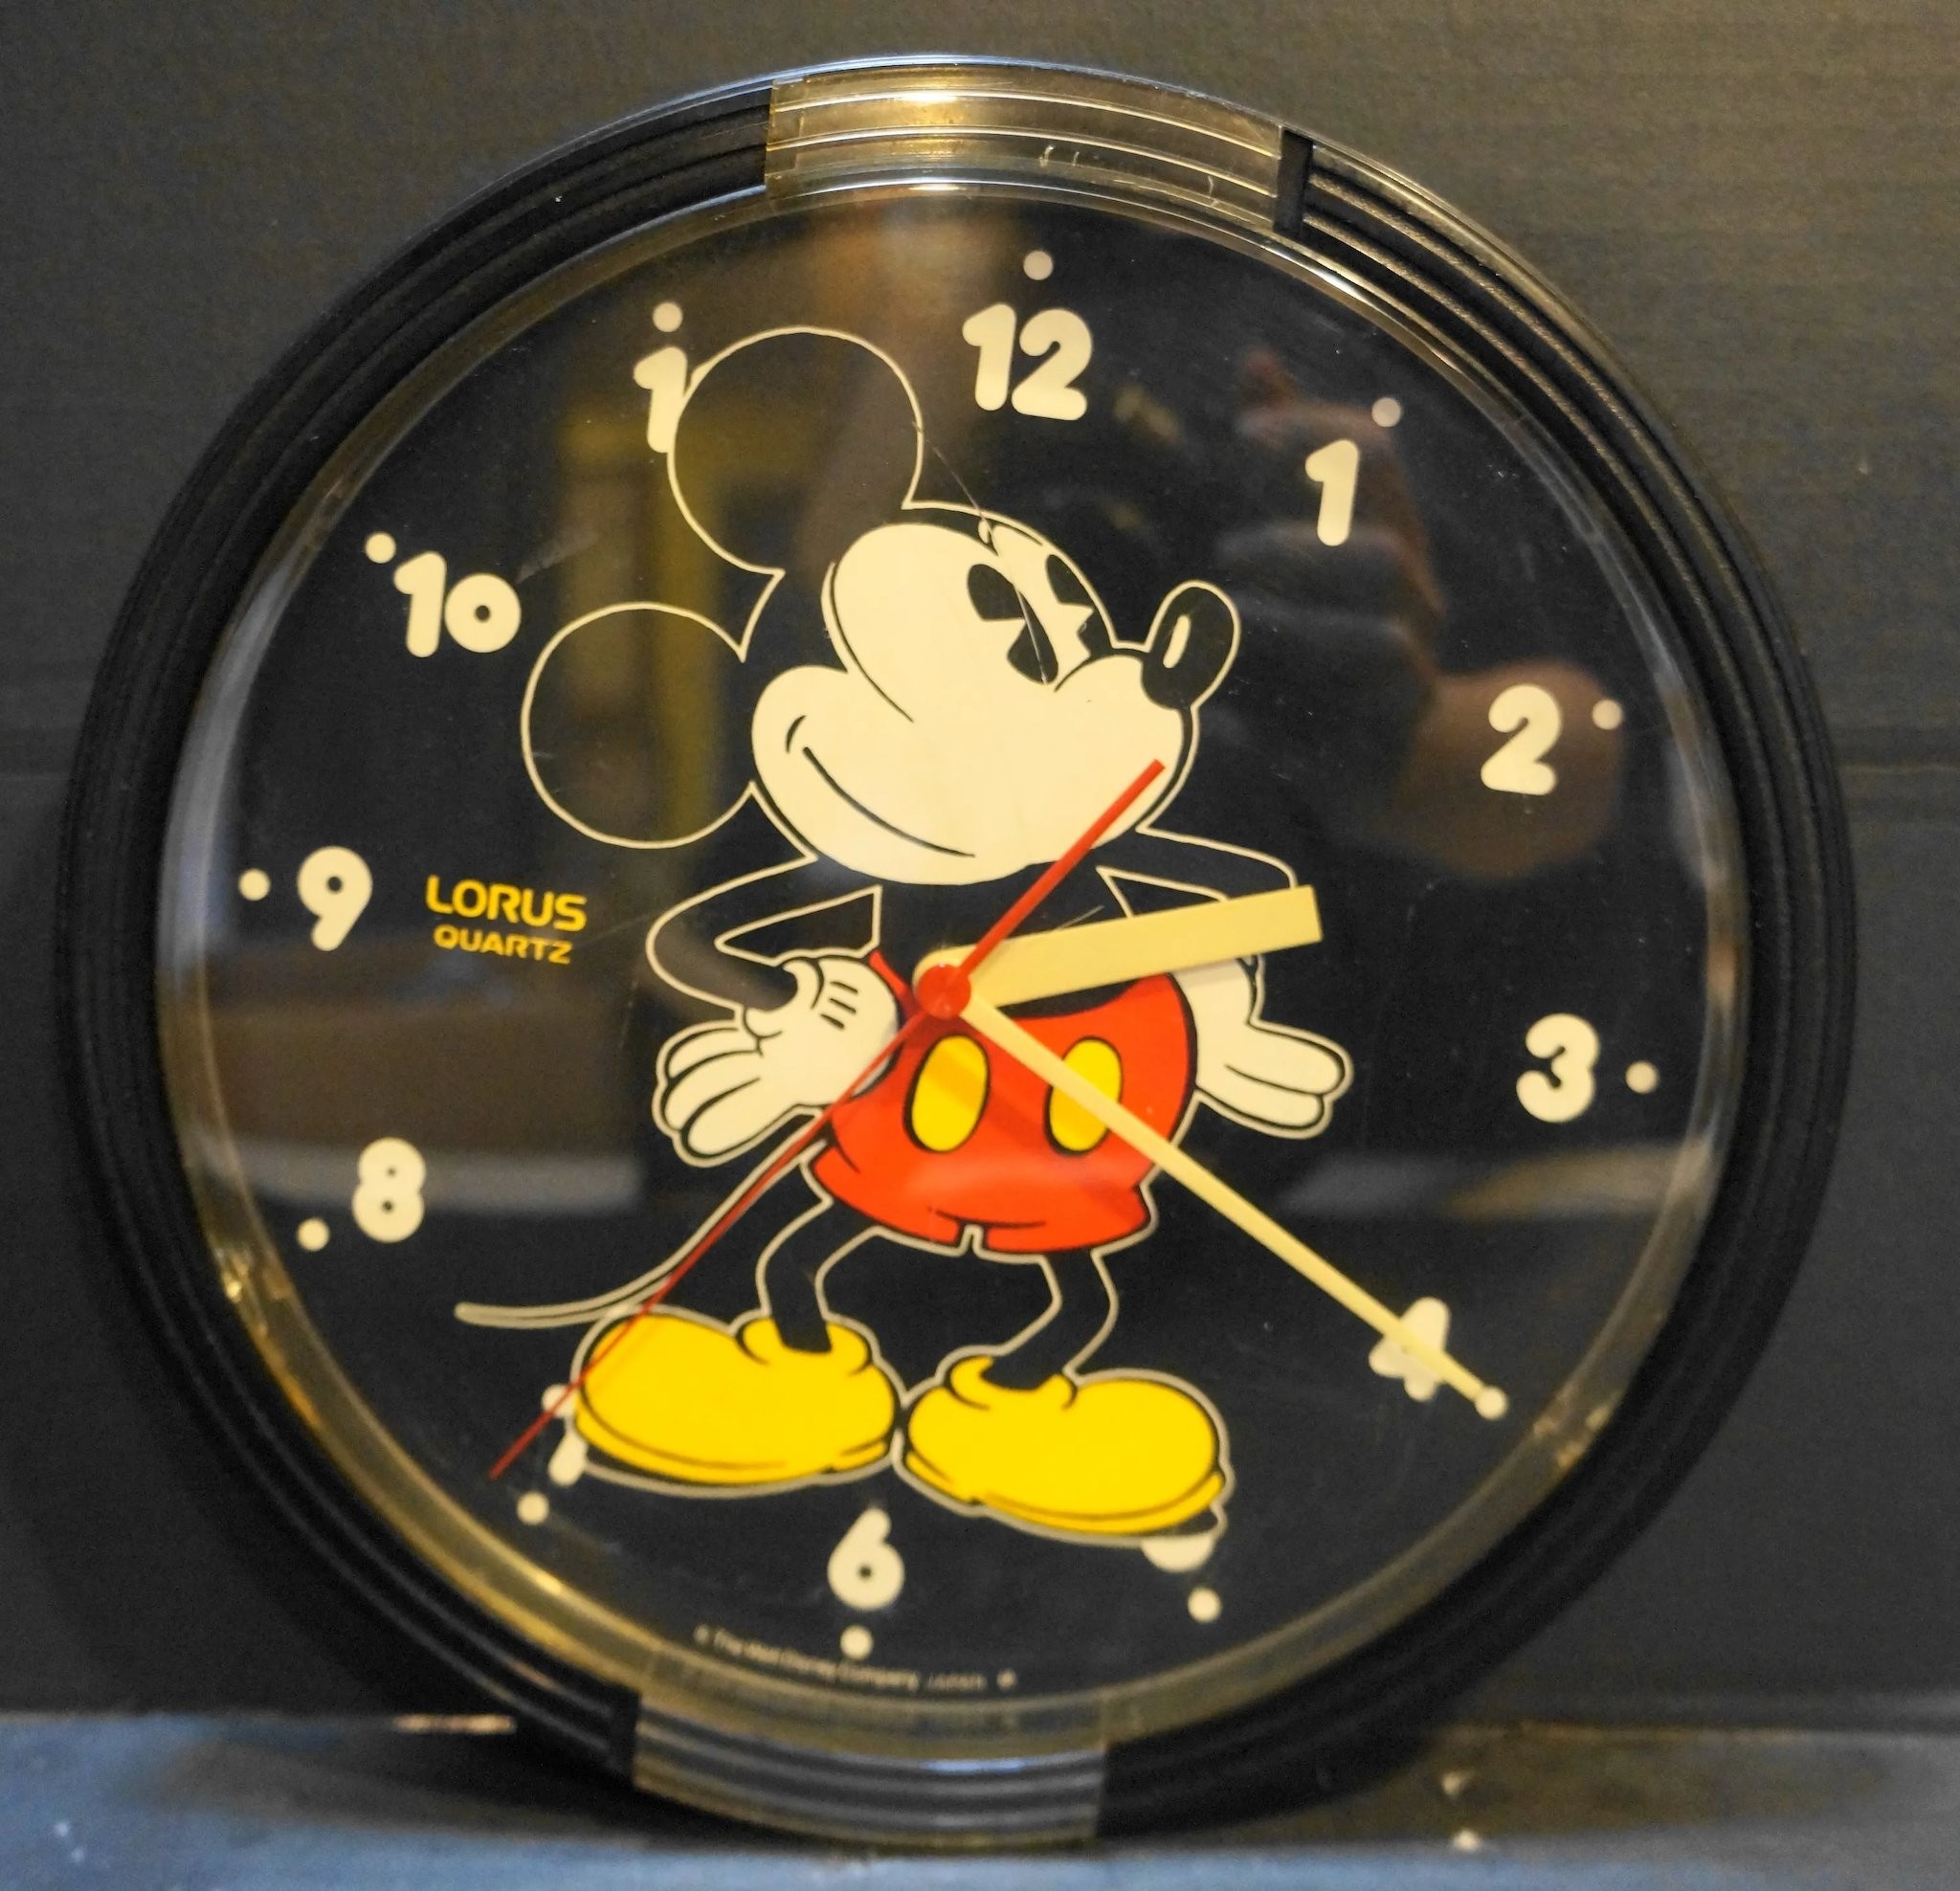 Mickey mouse lorus quartz wall clock made in japan 1980s